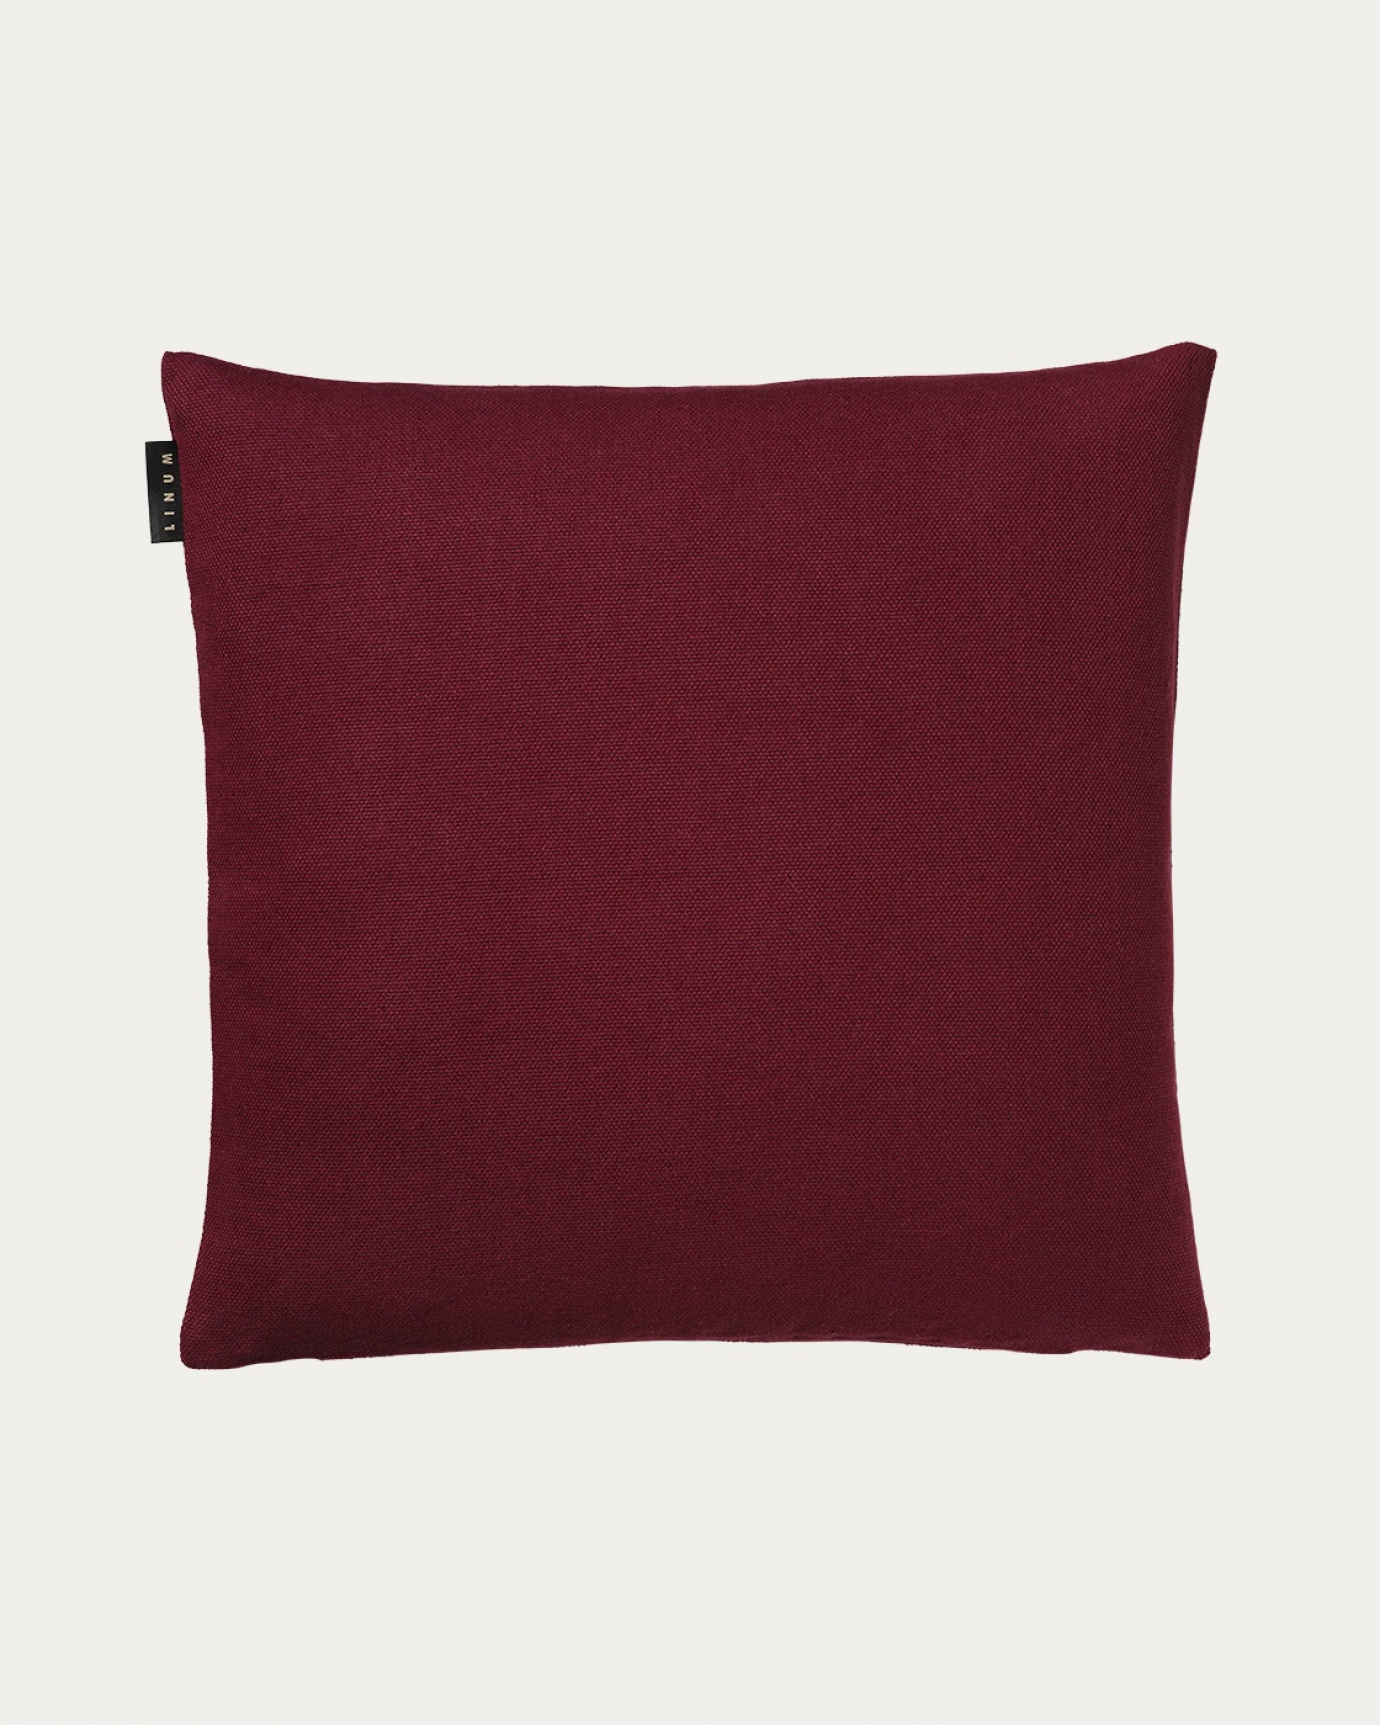 Product image burgundy red PEPPER cushion cover made of soft cotton from LINUM DESIGN. Easy to wash and durable for generations. Size 50x50 cm.